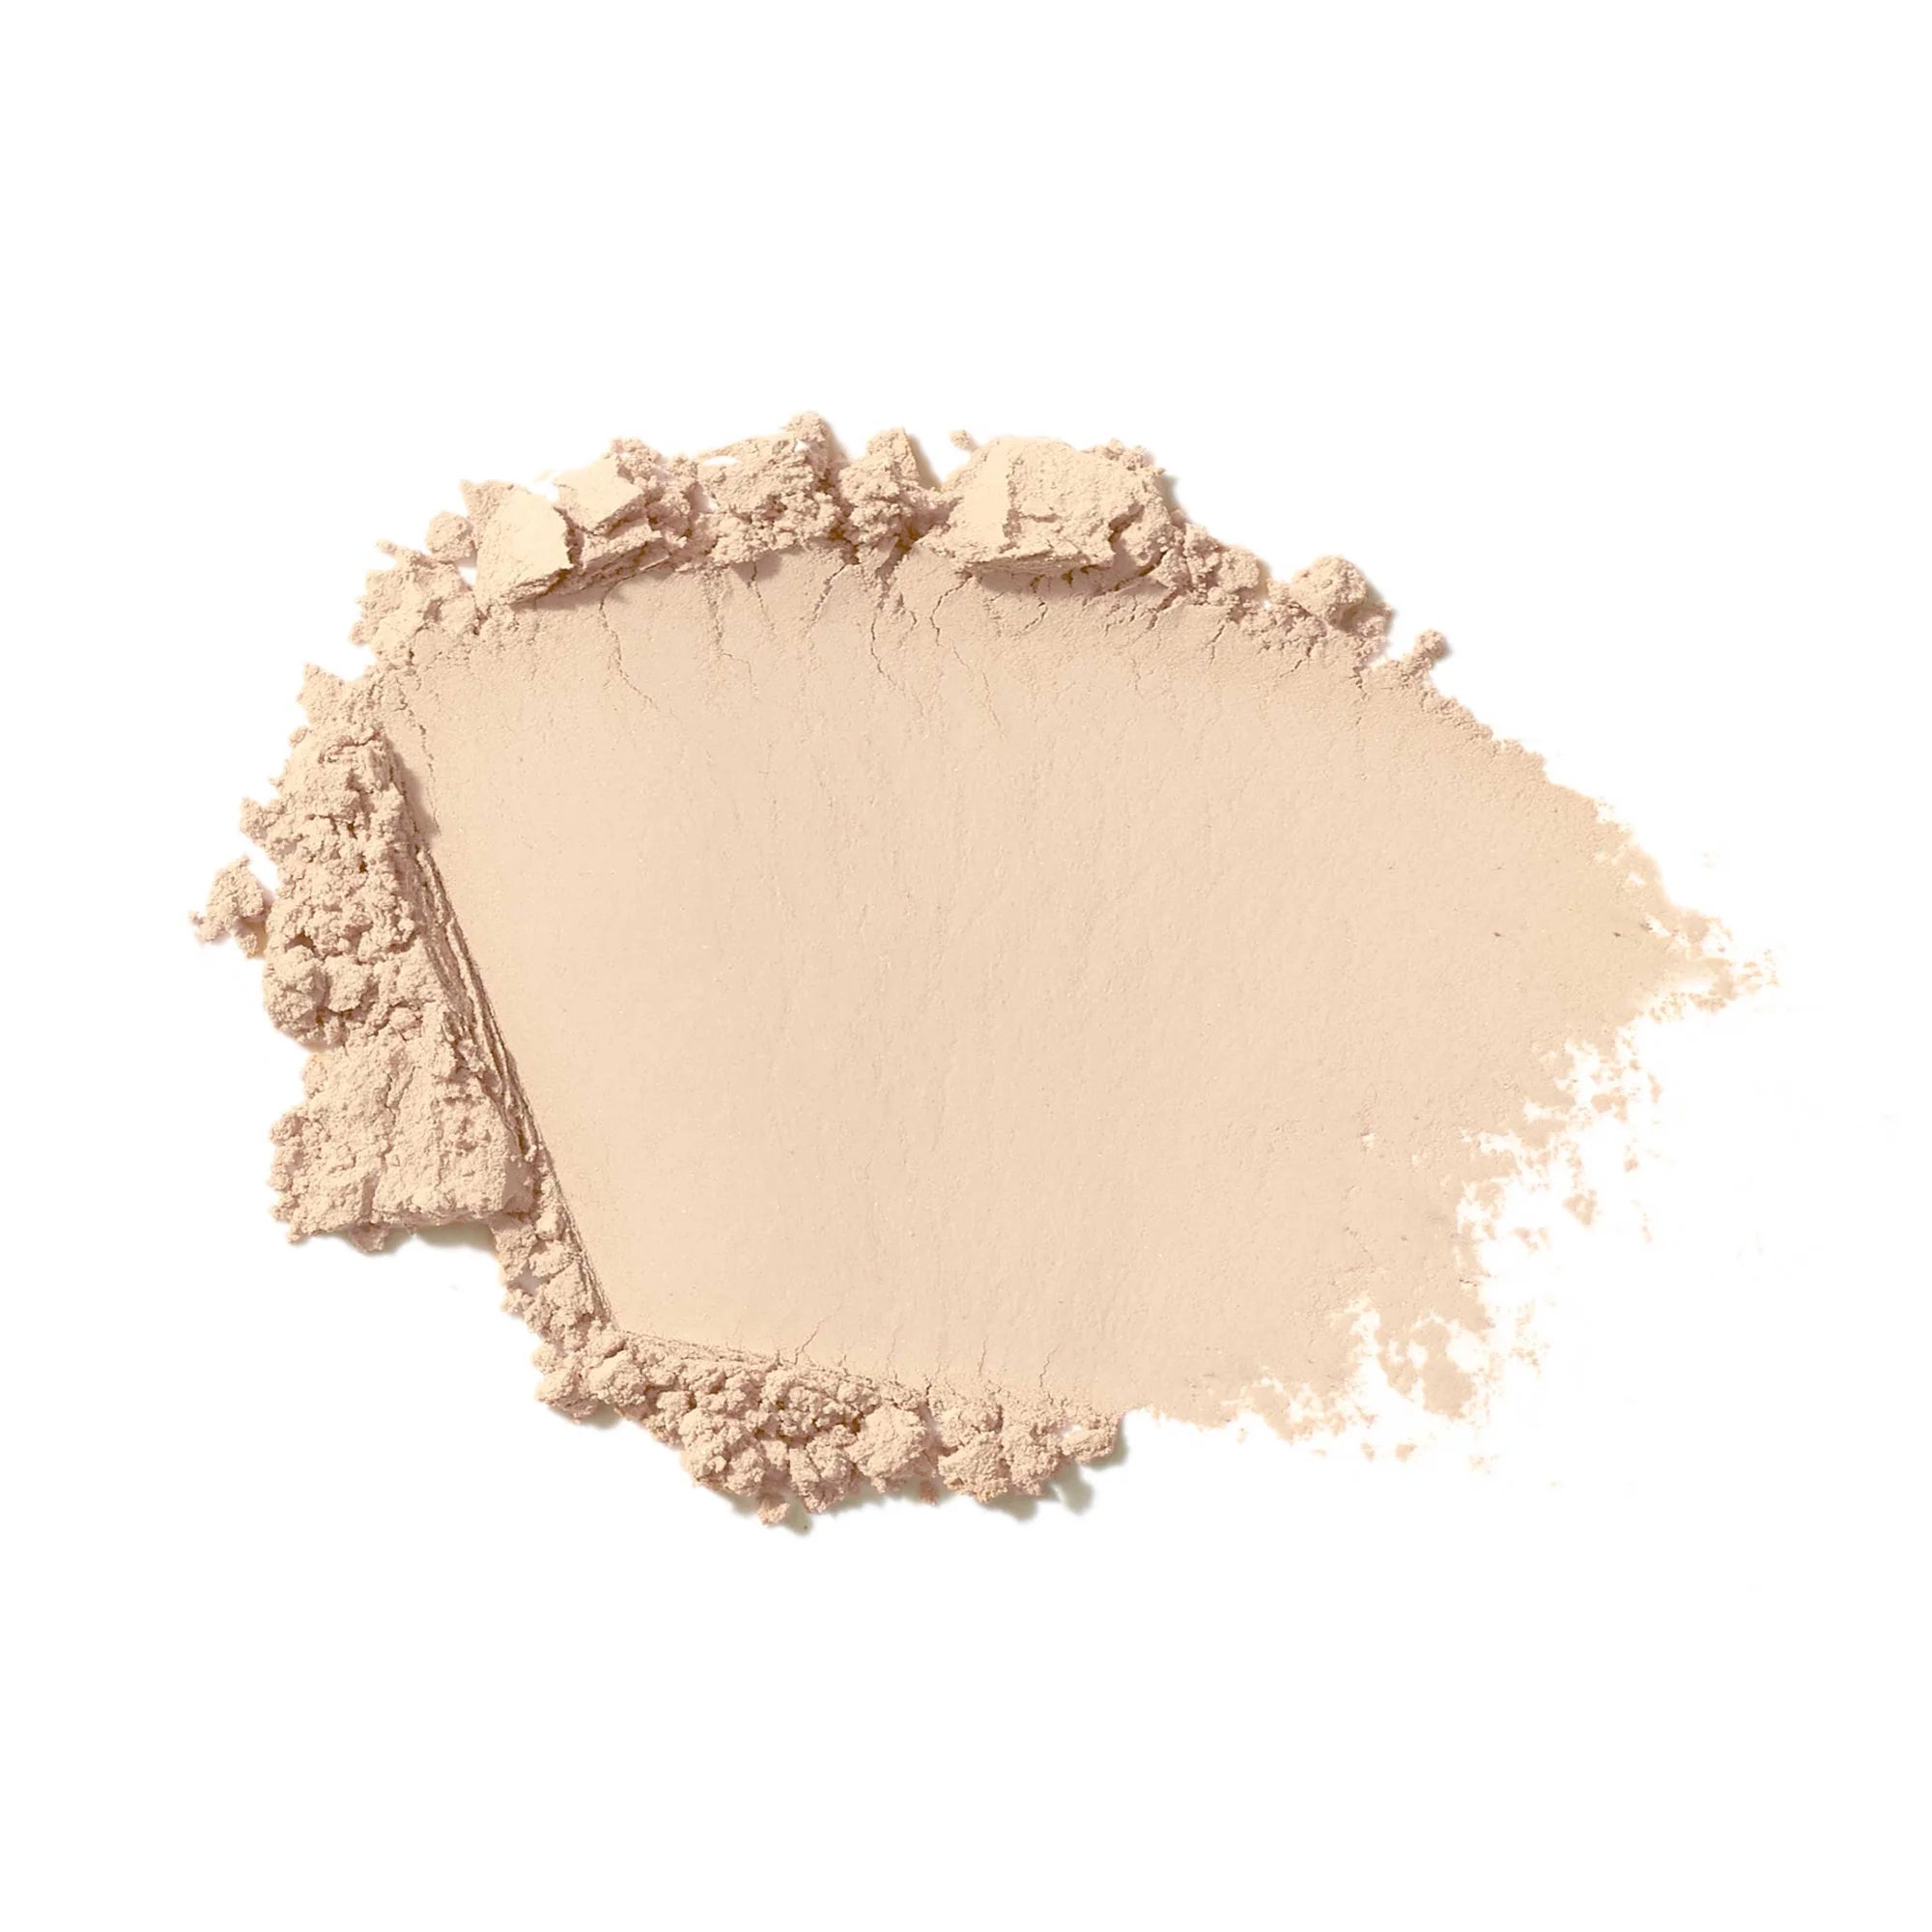 Jane Iredale's PurePressed® Base Mineral Foundation - shade Warm Silk - light with gold undertones